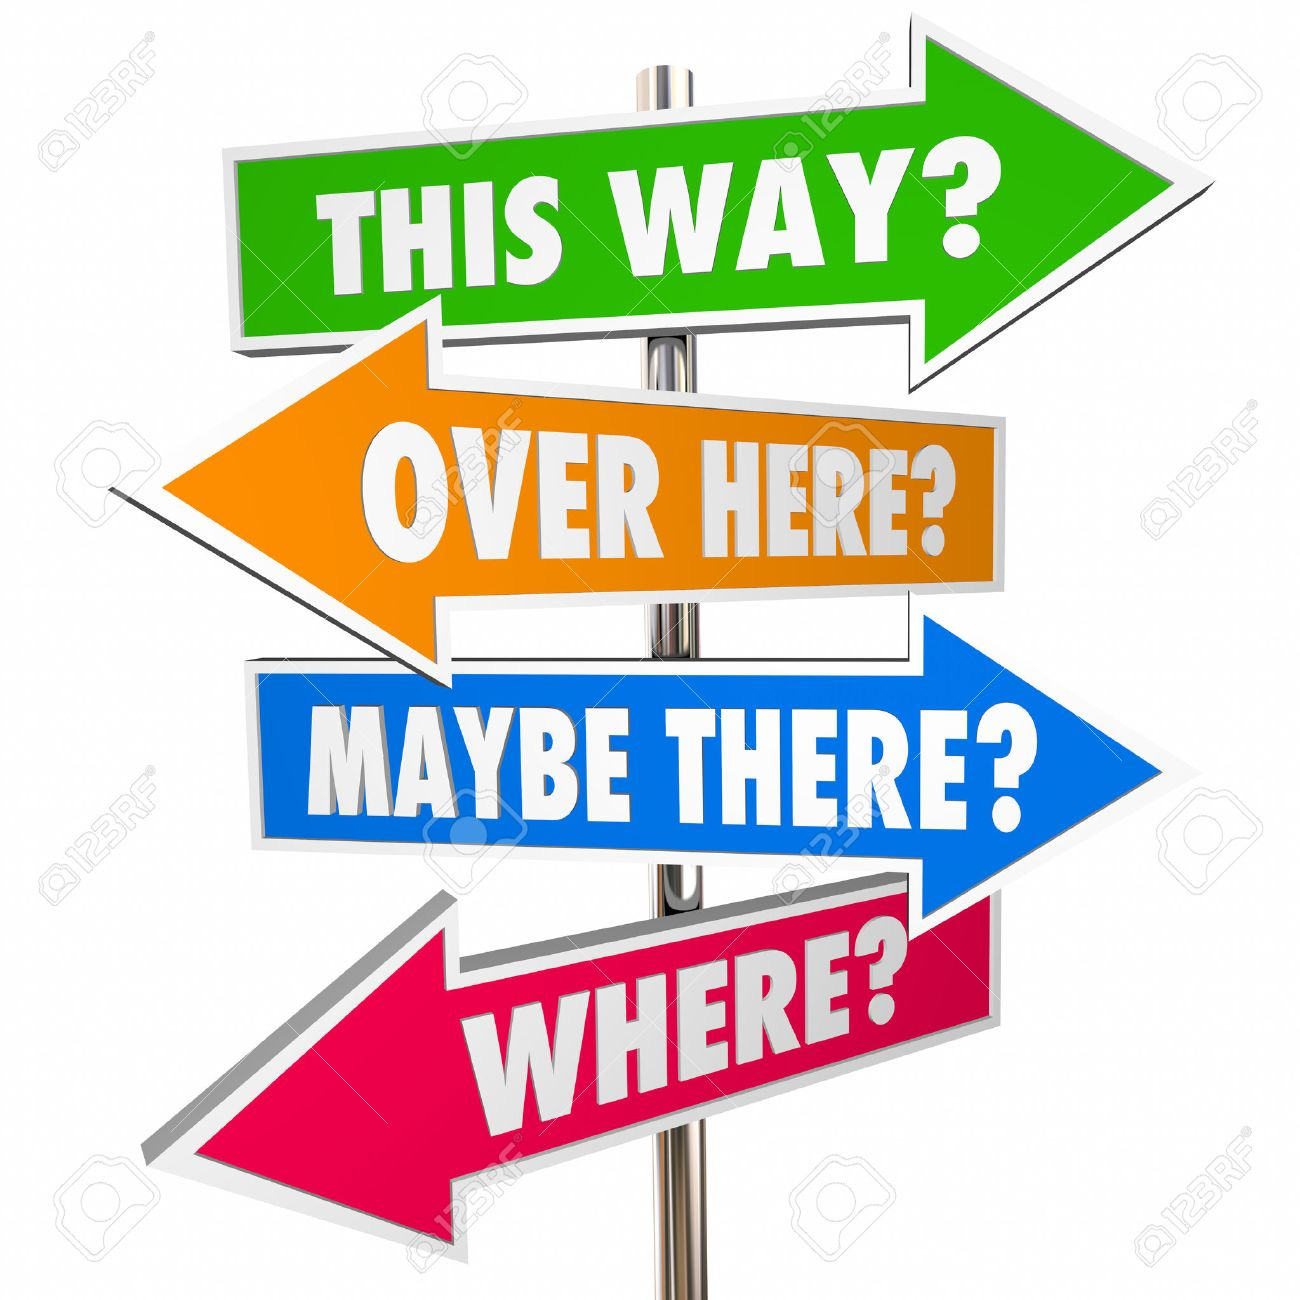 This Way Over There Arrow Signs Lost Confusion Help Direction 3D Stock  Photo, Picture And Royalty Free Image. Image 53467607.